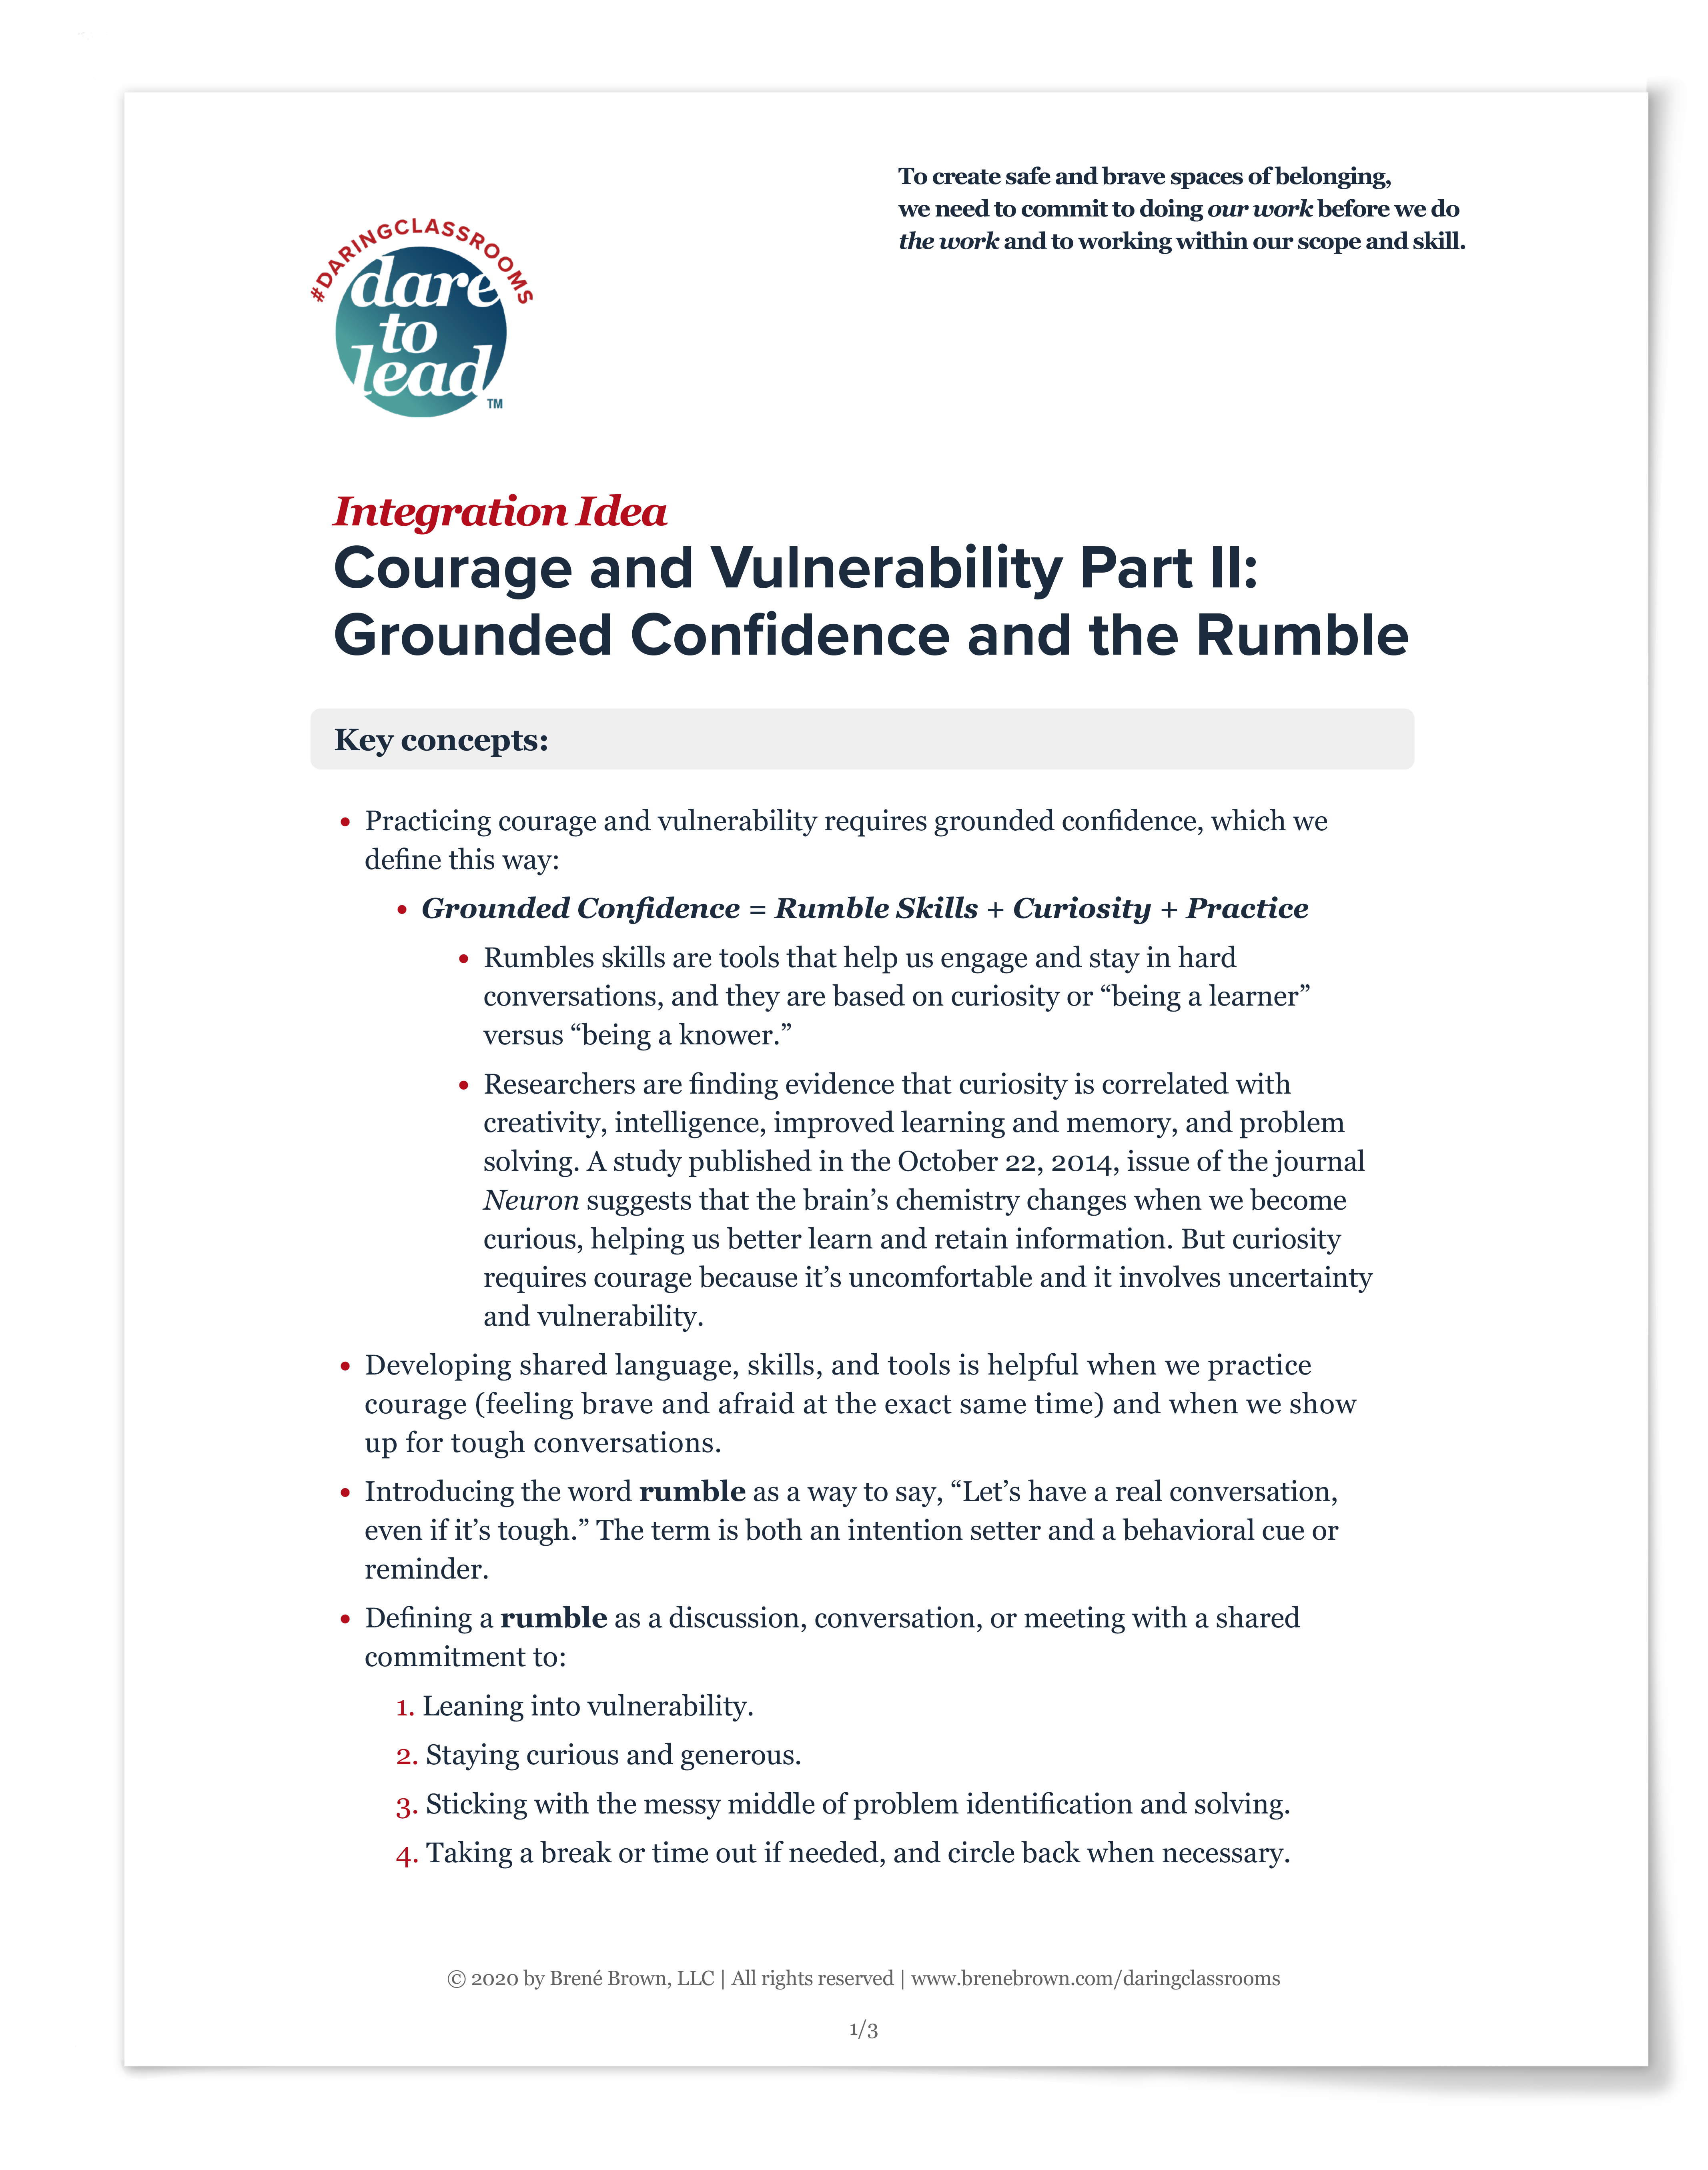 Courage and Vulnerability Part 2: Grounded Confidence and the Rumble for Daring Classrooms